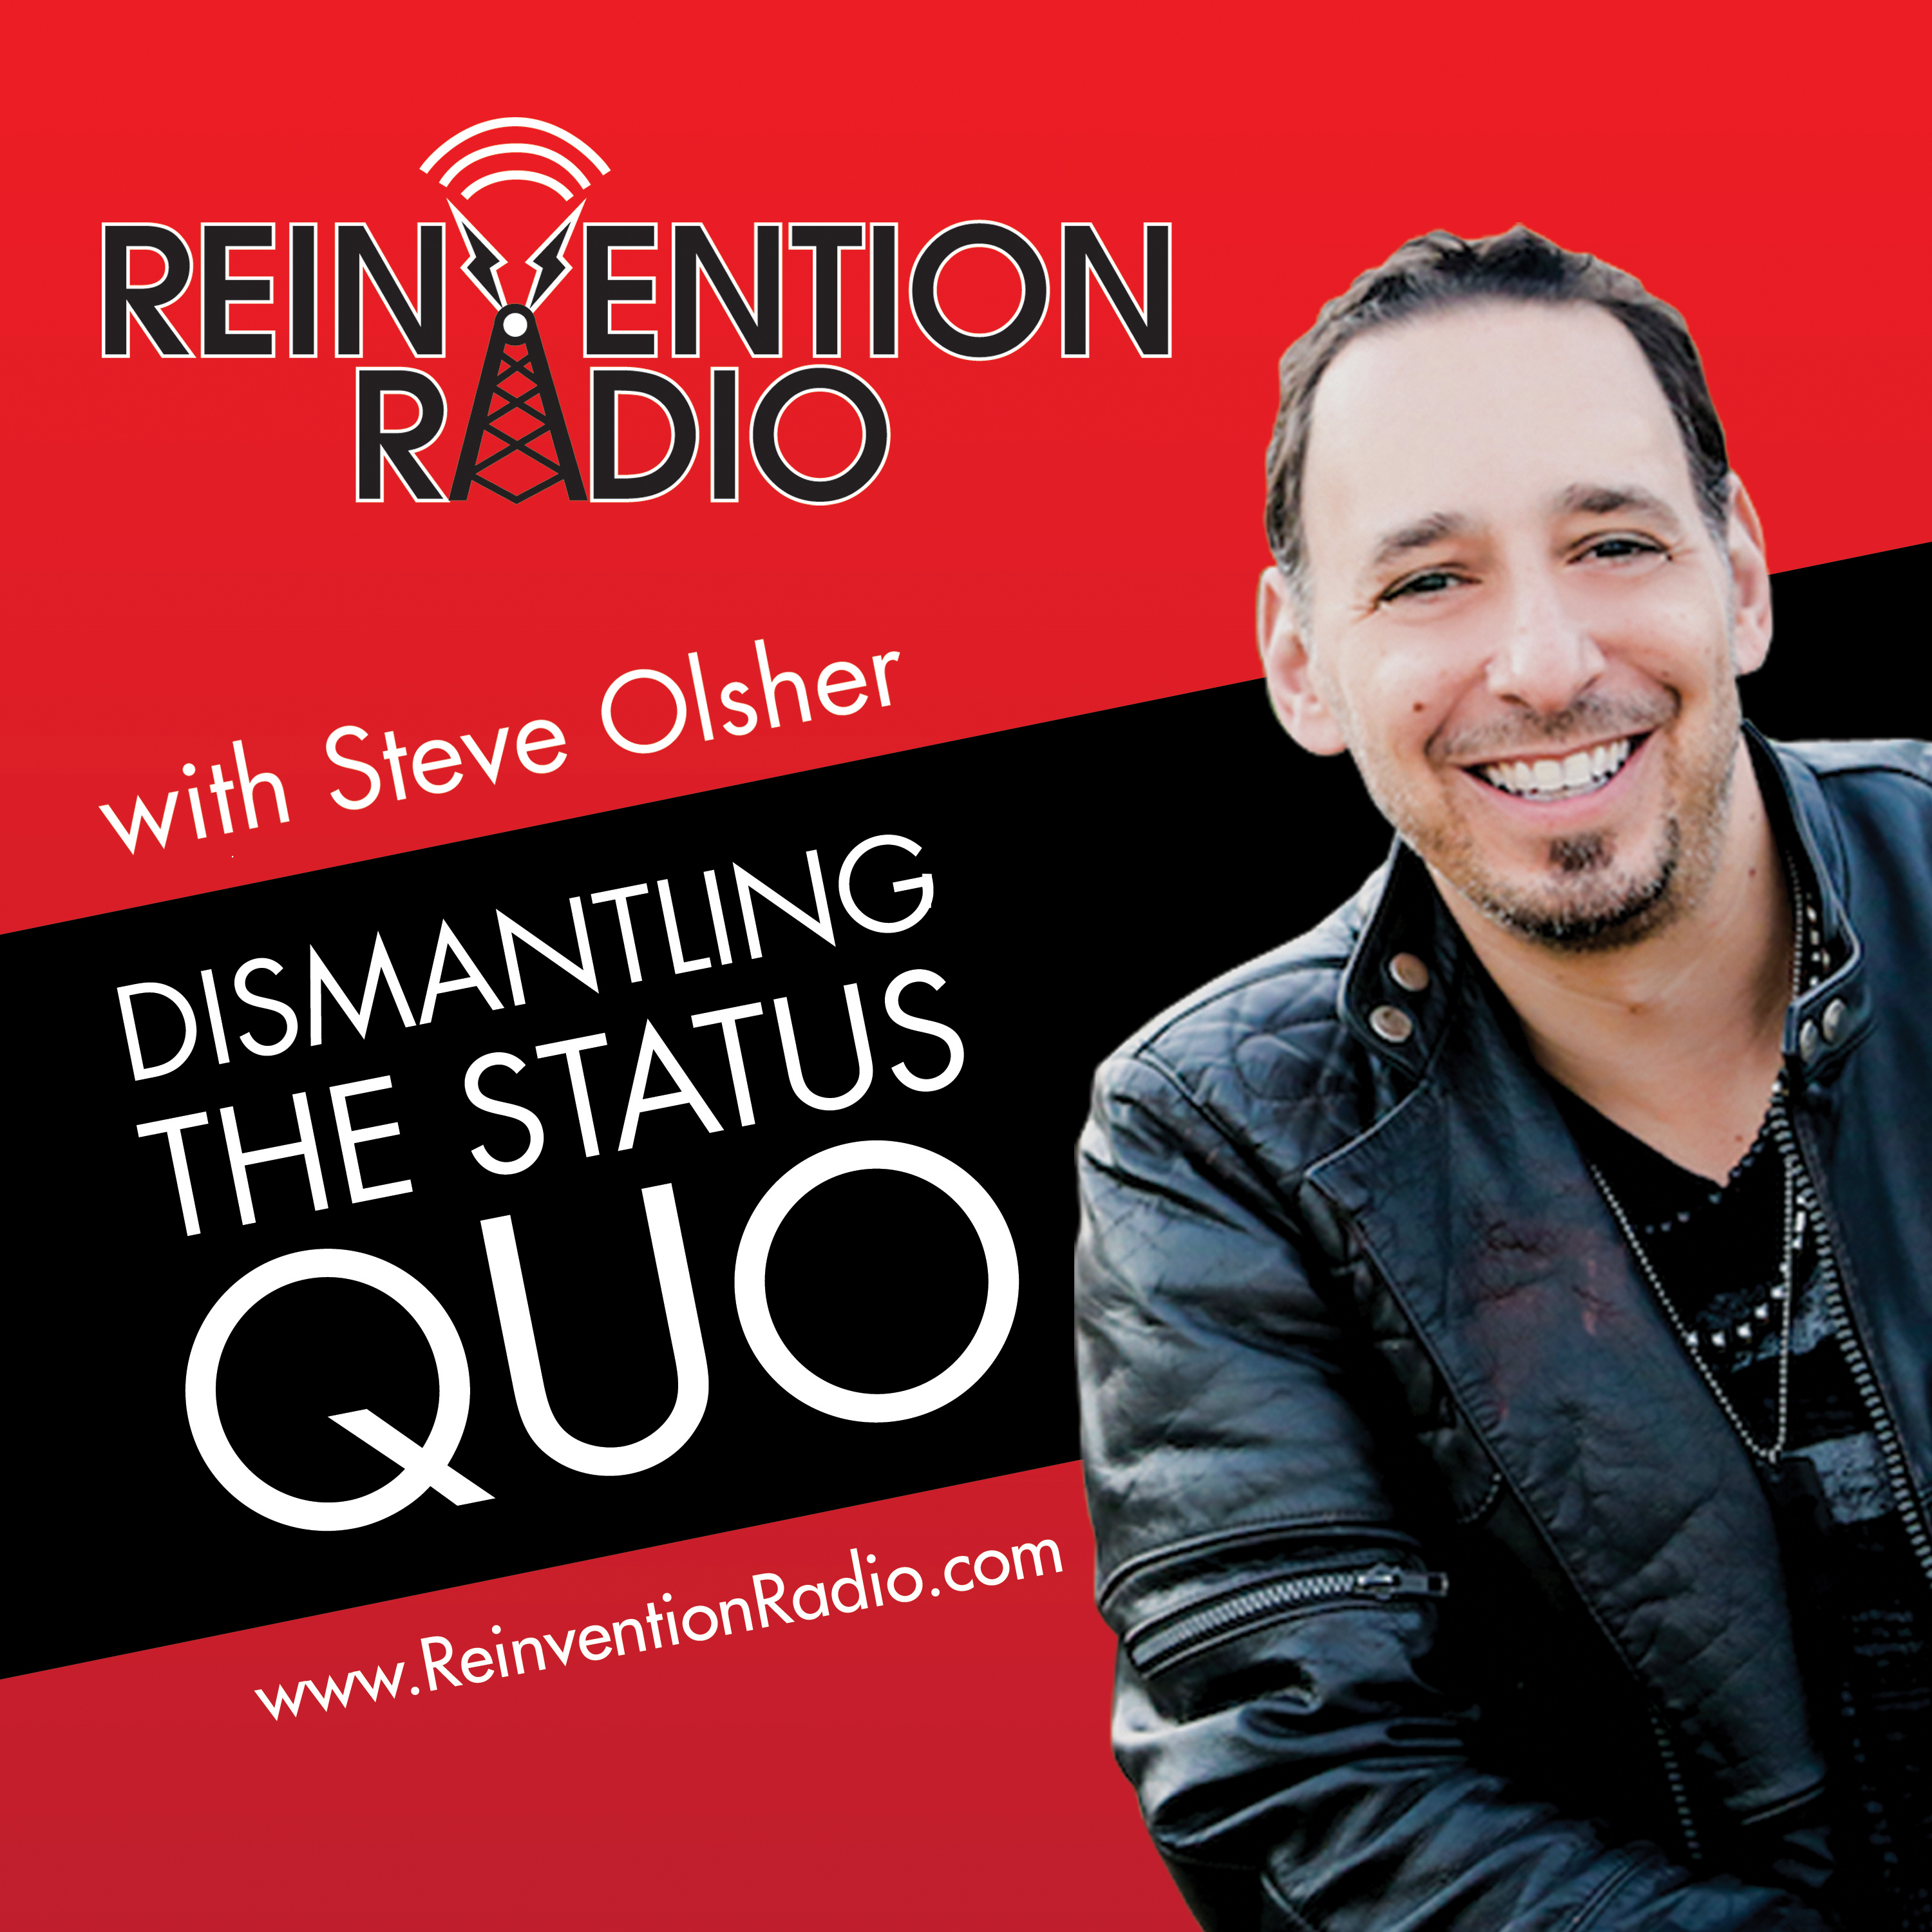 A highlight from REINVENTION RADIO CLASSIC #4 SIT DOWN WITH LEWIS HOWES